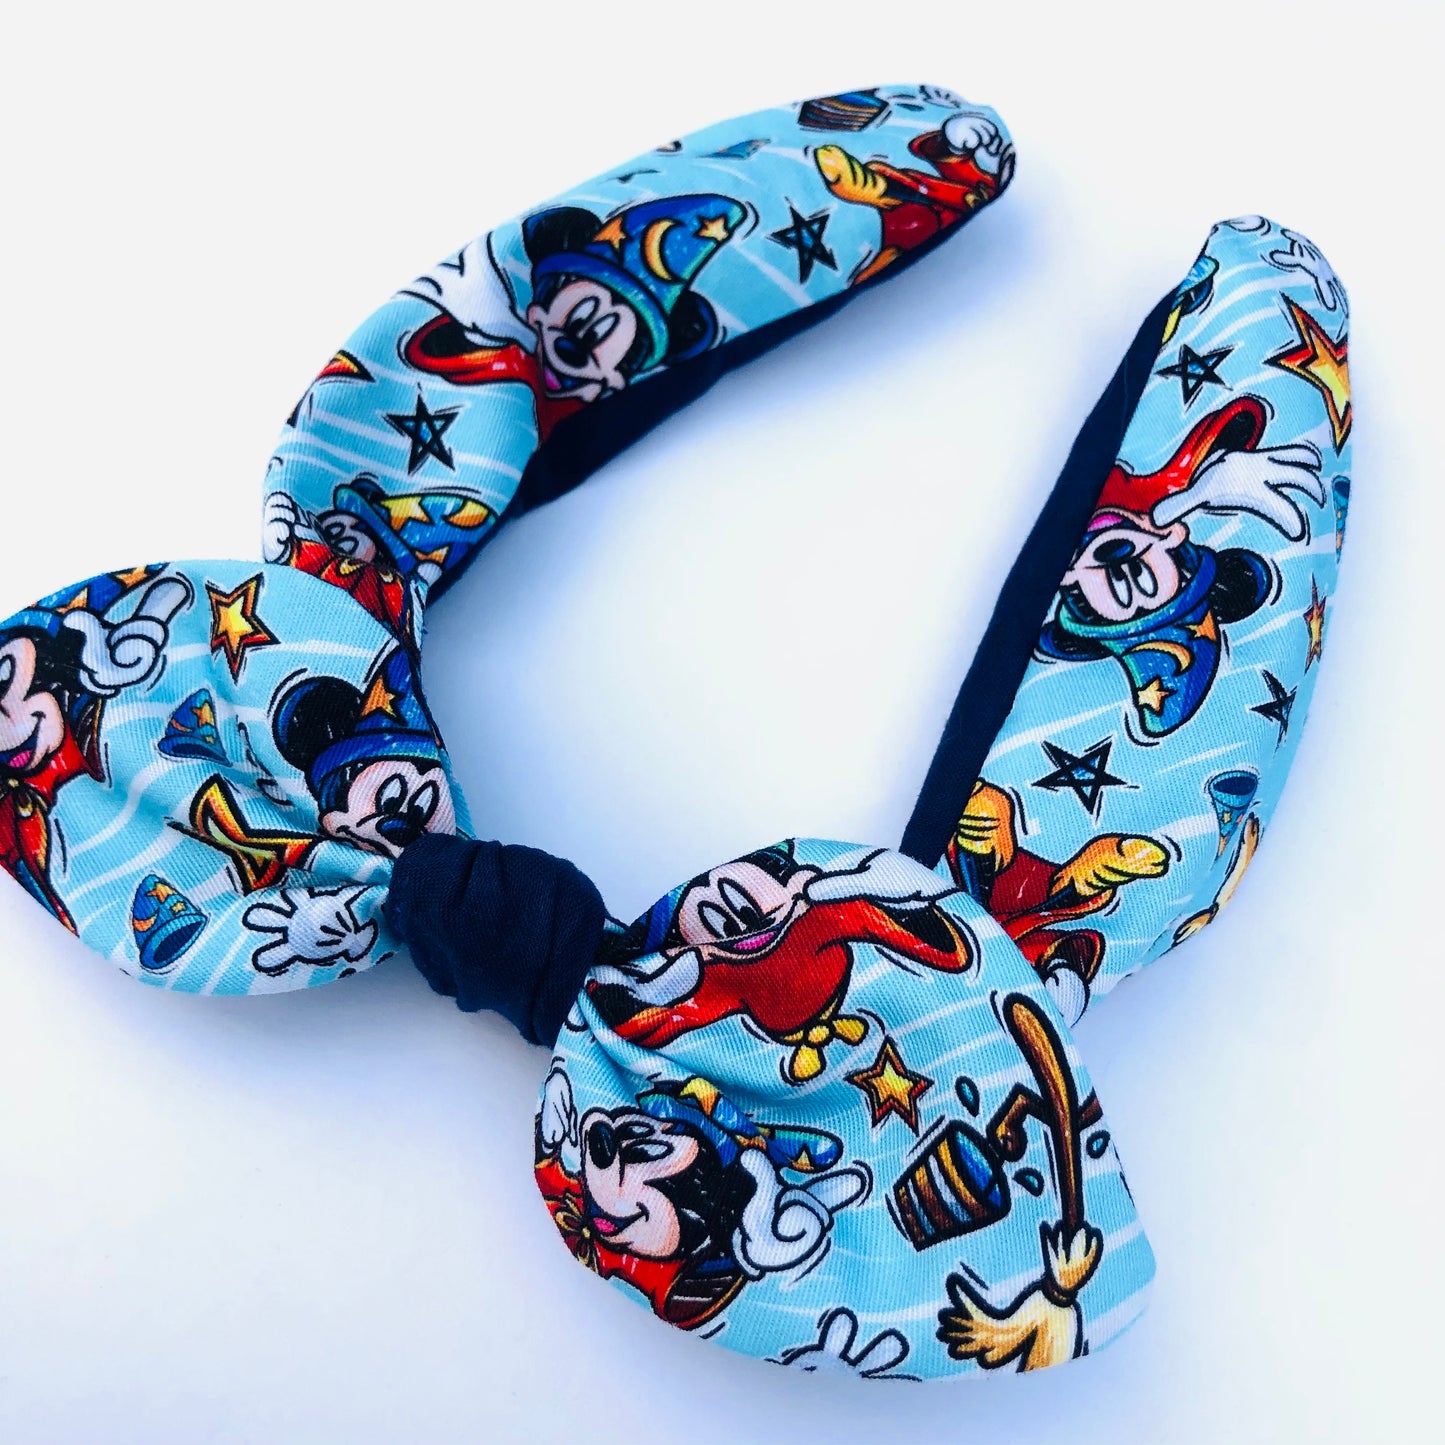 The Main Mouse Bowbands